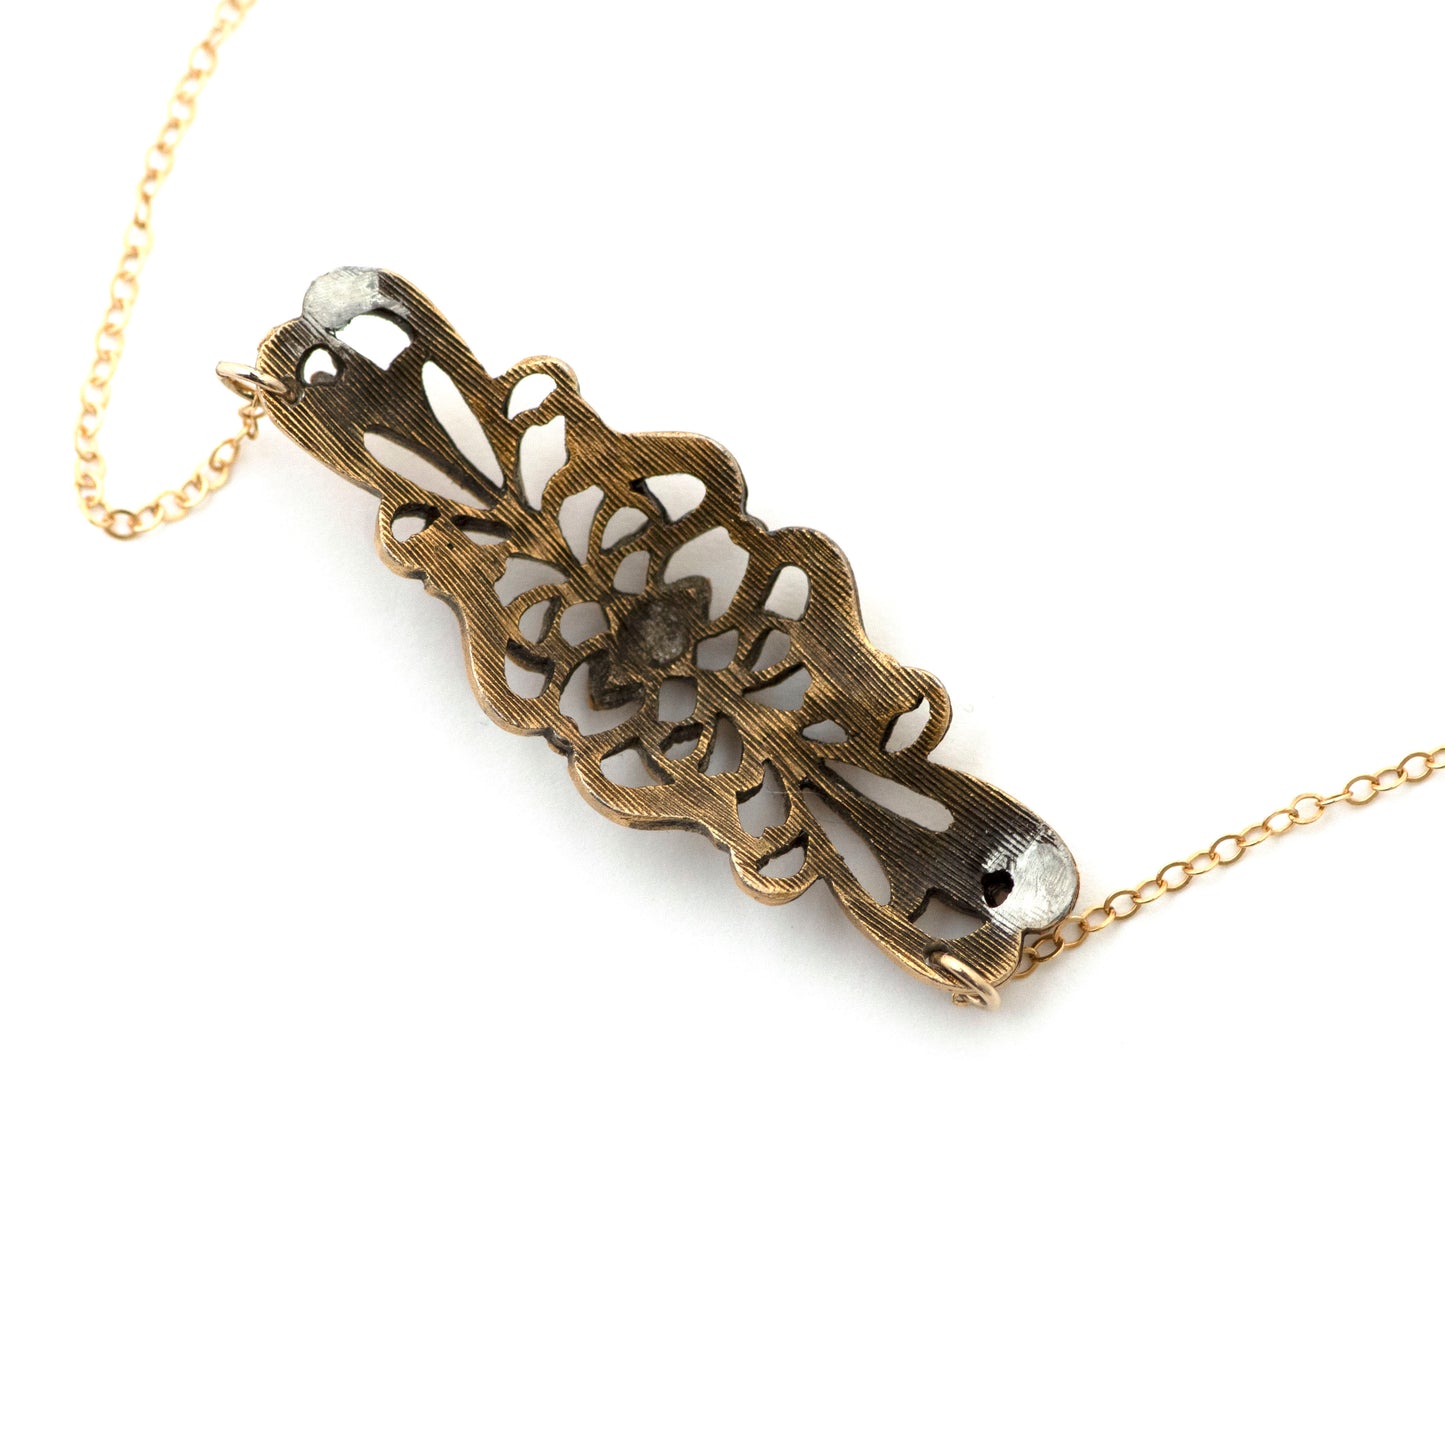 A product photography image of the backside of a vintage bar pin repurposed pendant dangling on a 14k gold filled cable chain on a white background. 